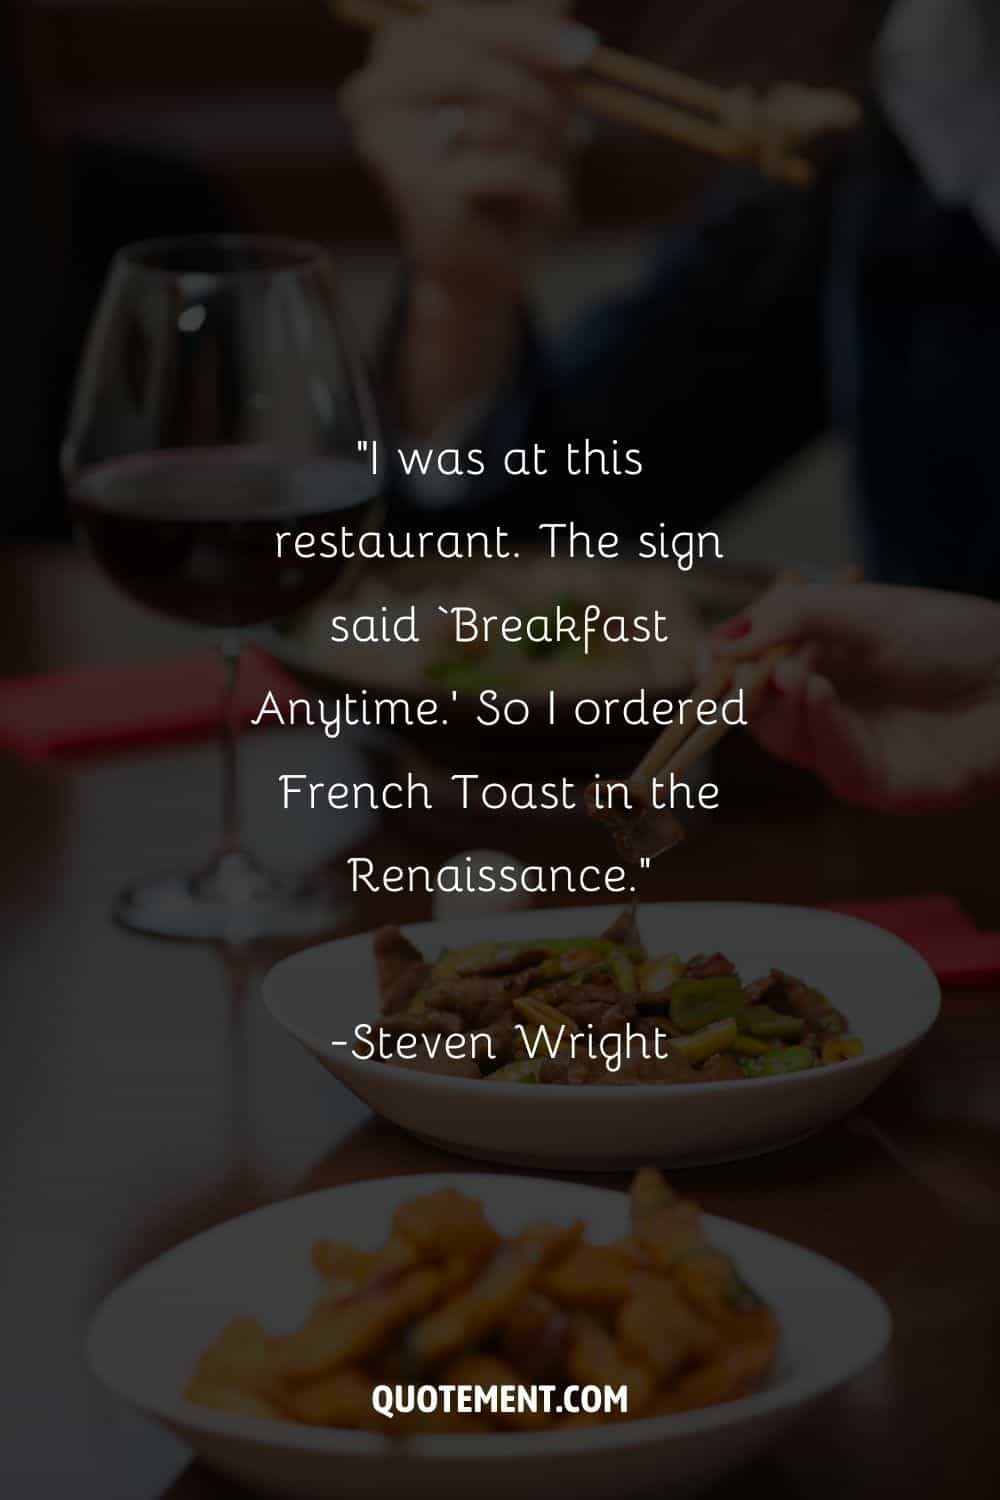 People around the table eating food representing a funny breakfast quote.